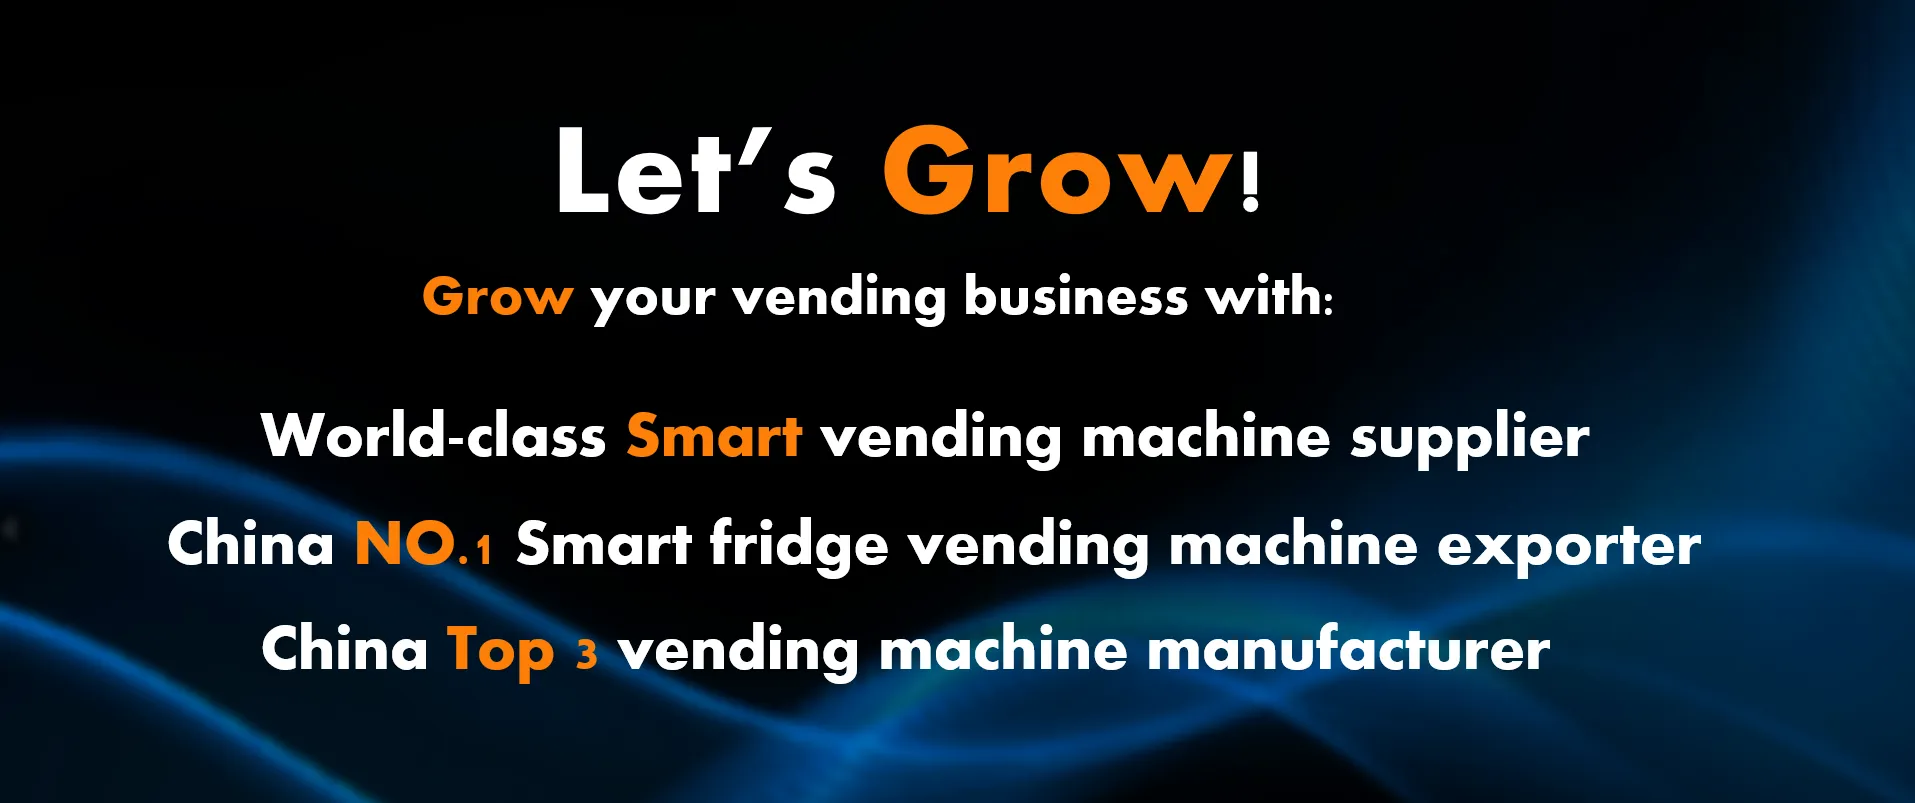 Let us grow our vending business together.